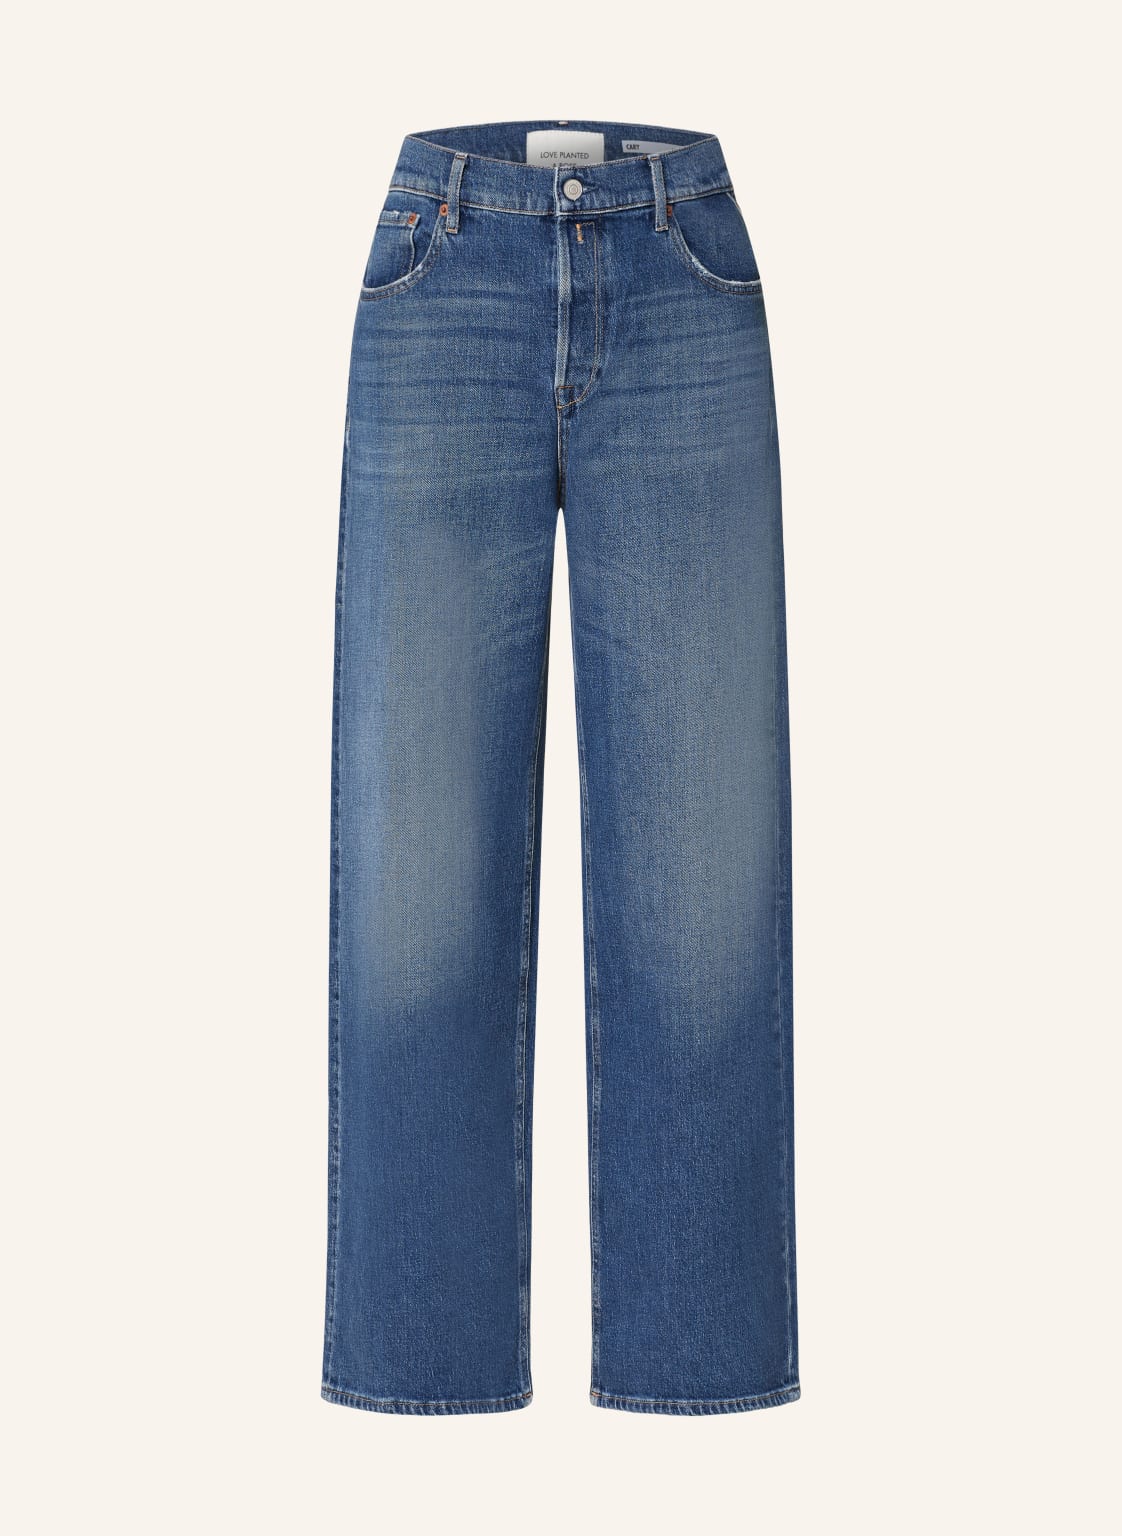 Replay Straight Jeans Cary blau von Replay